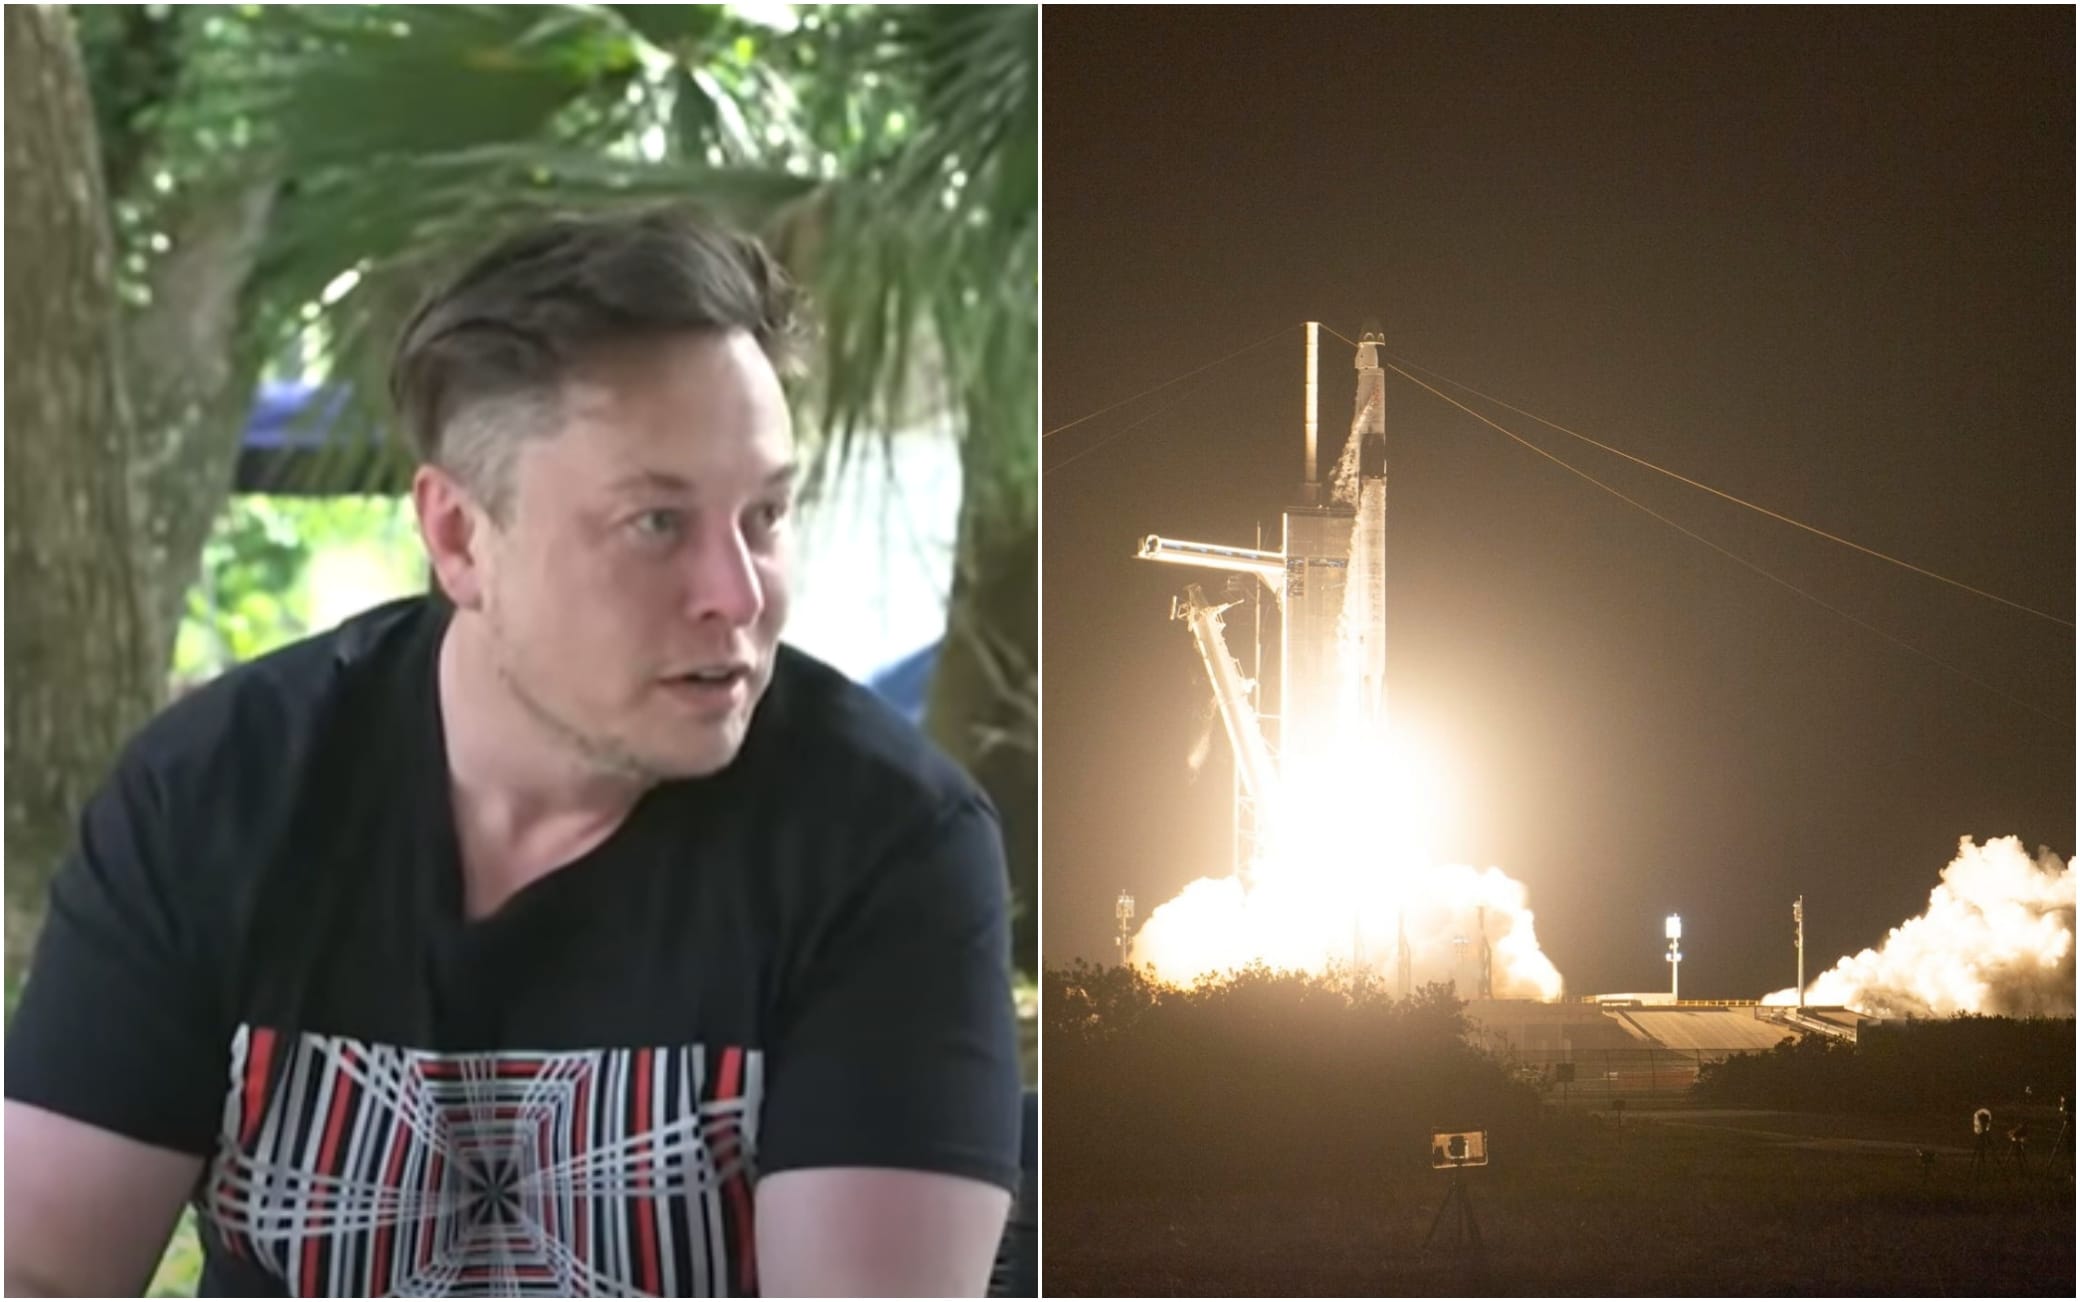 Elon Musk: “By 2026 I will take humans to Mars with SpaceX but someone will die”